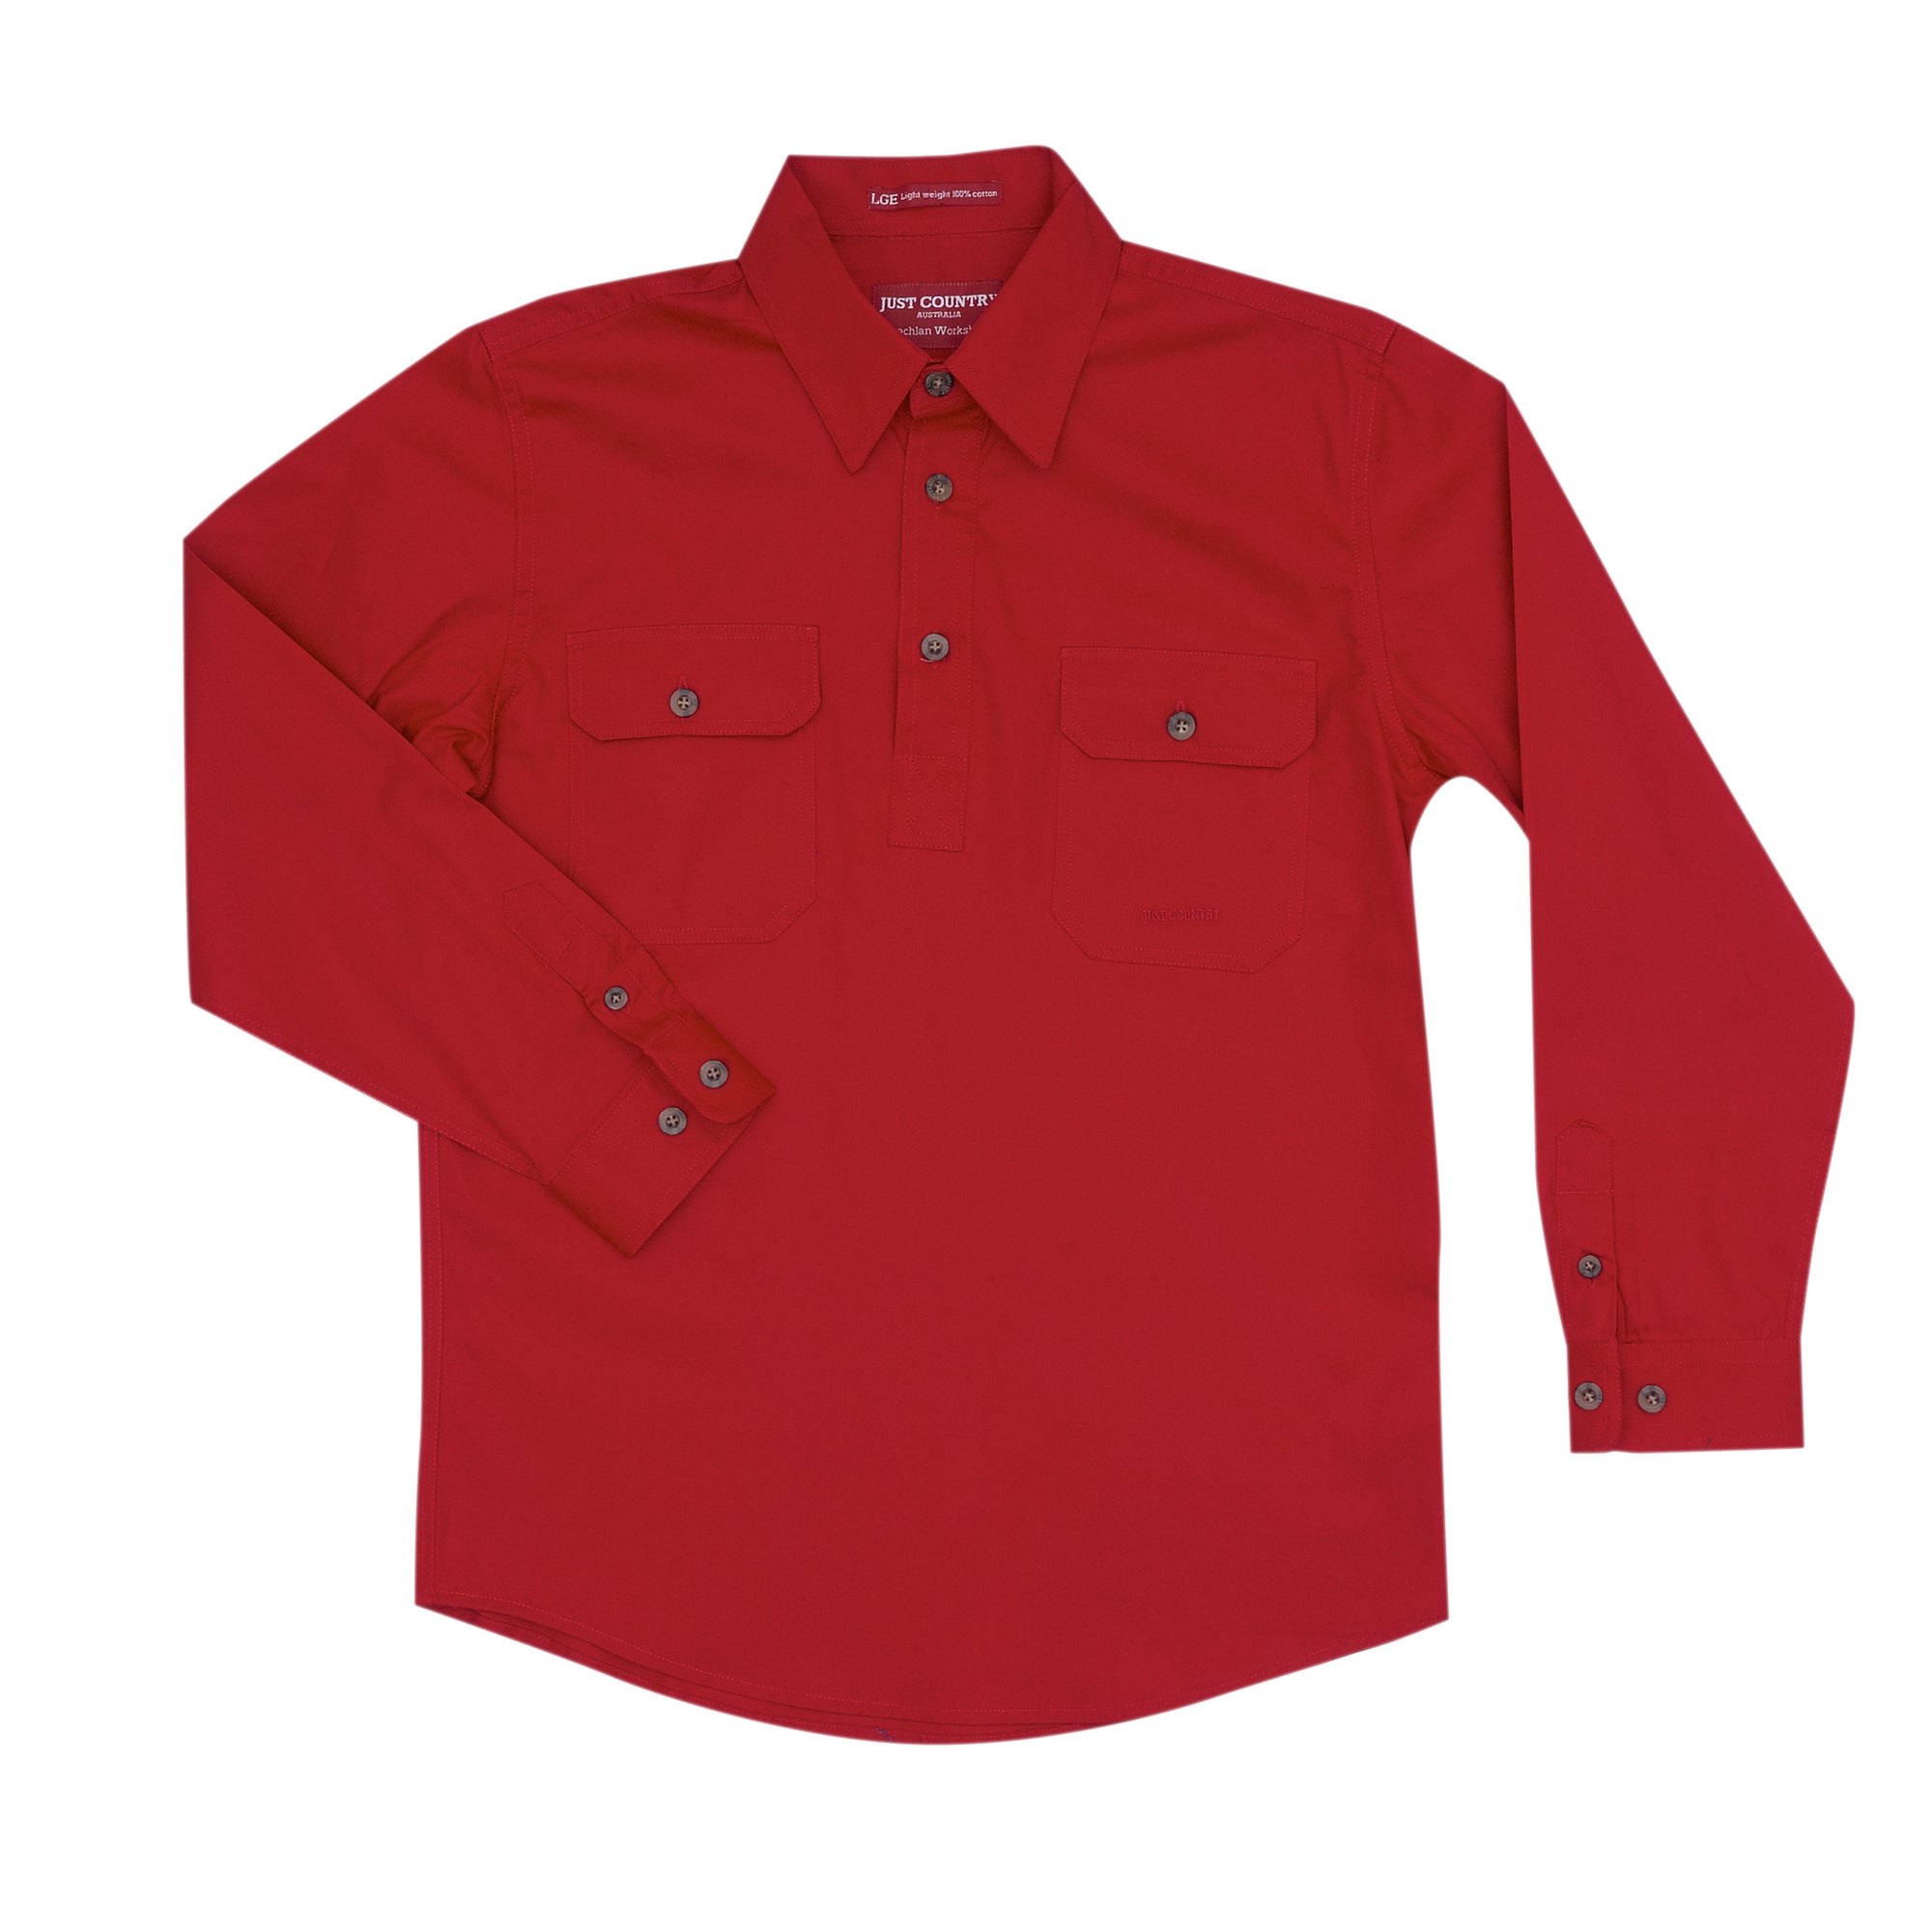 Just Country Workshirt Boys Lachlan Chilli